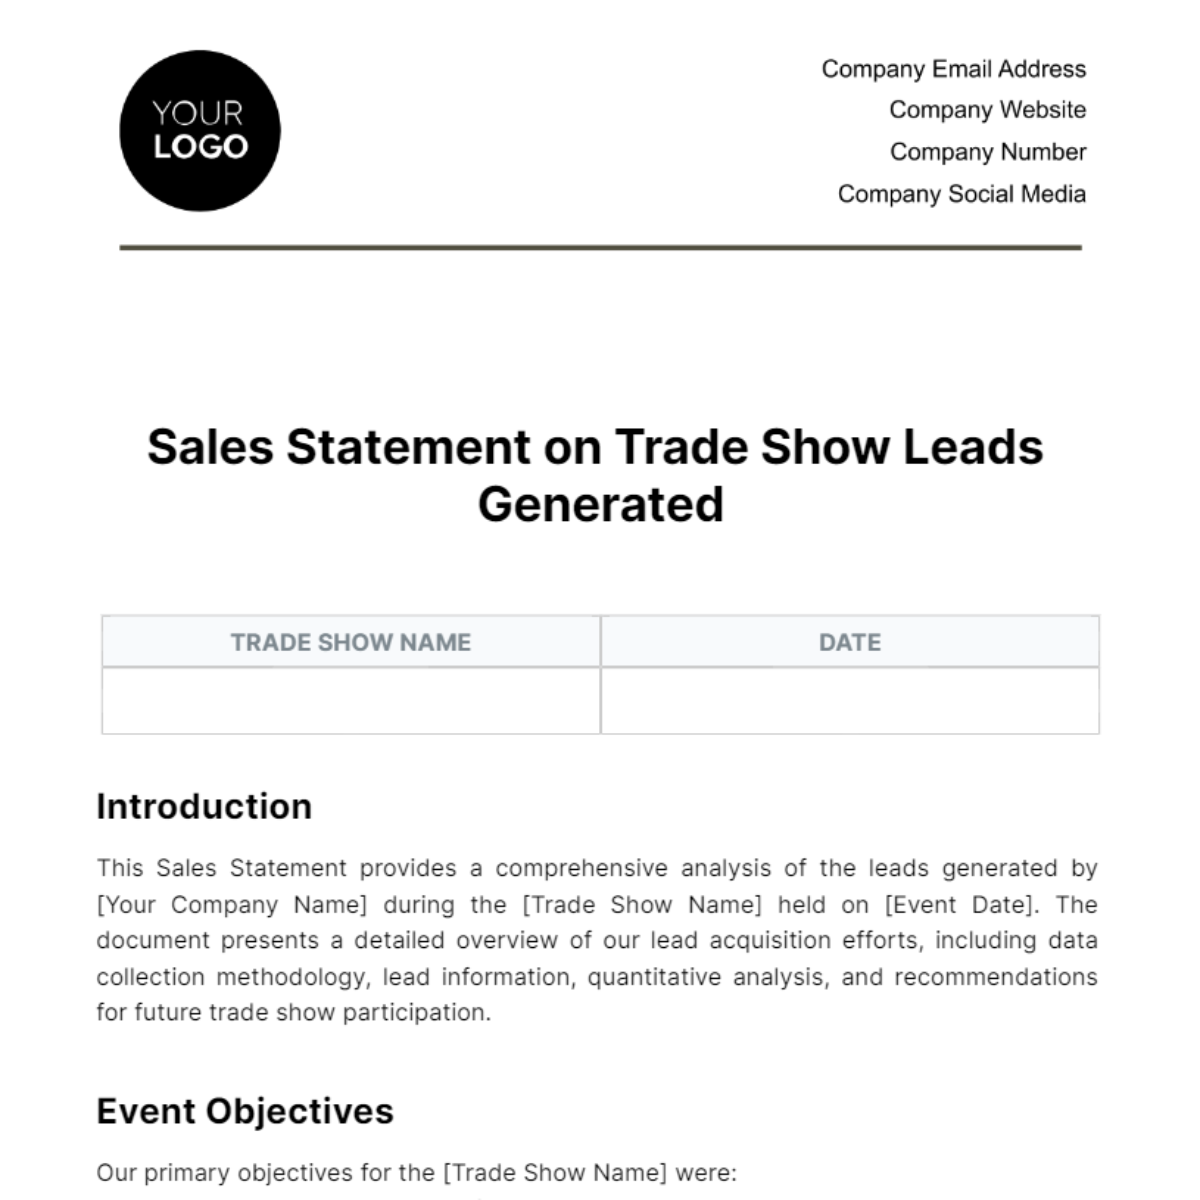 Sales Statement on Trade Show Leads Generated Template